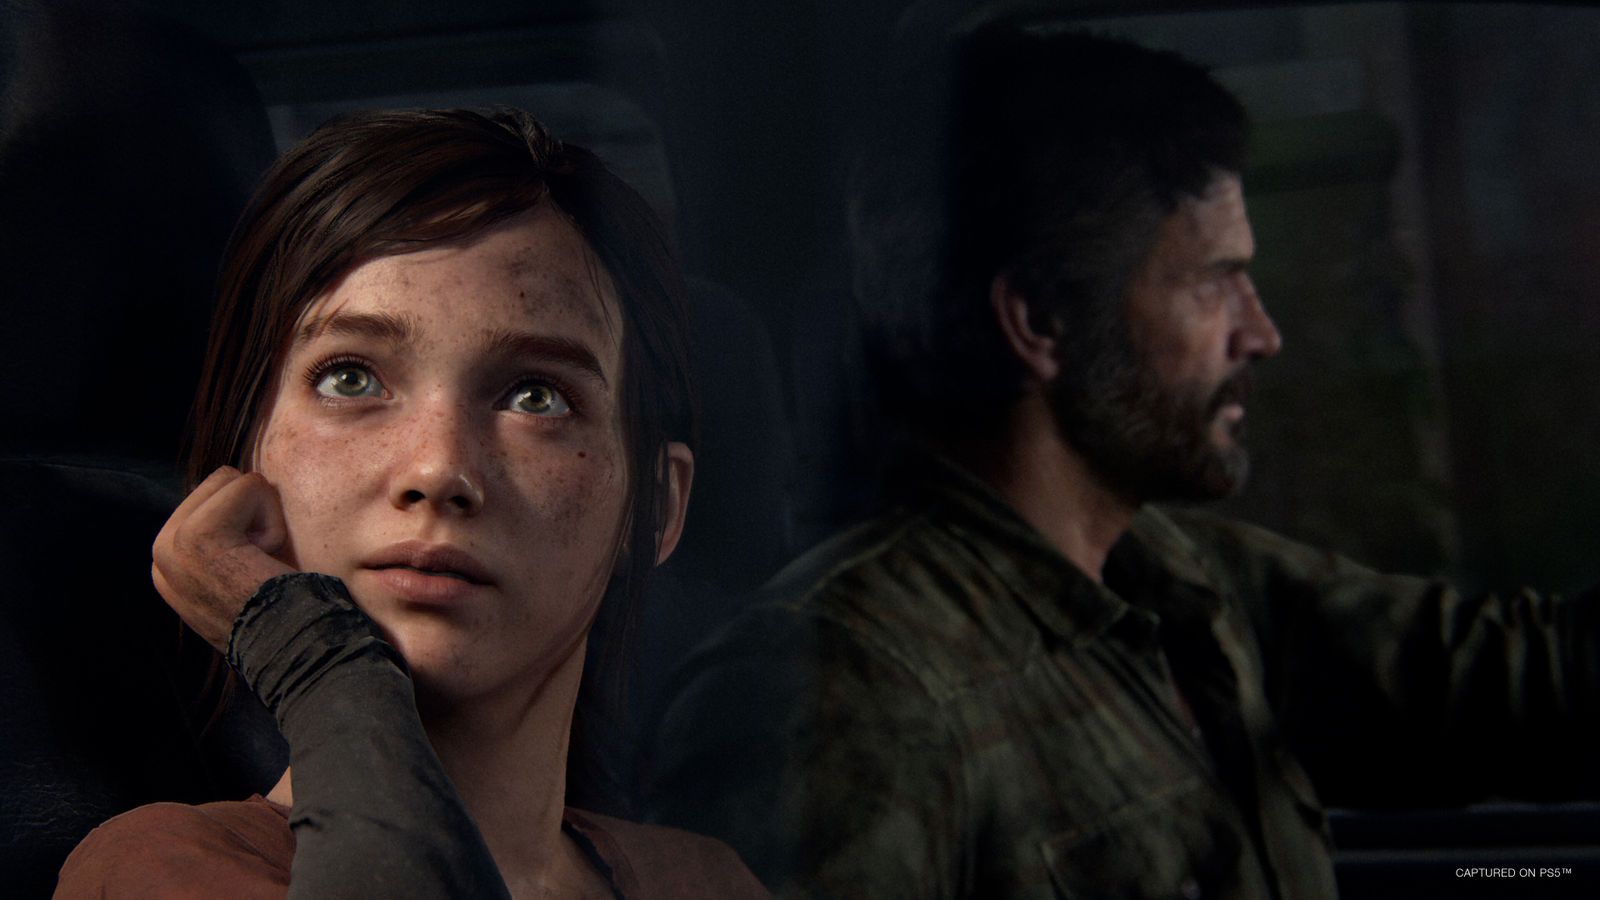 Players Report That 'Last Of Us' PC Port Is Filled With Ridiculous Bugs